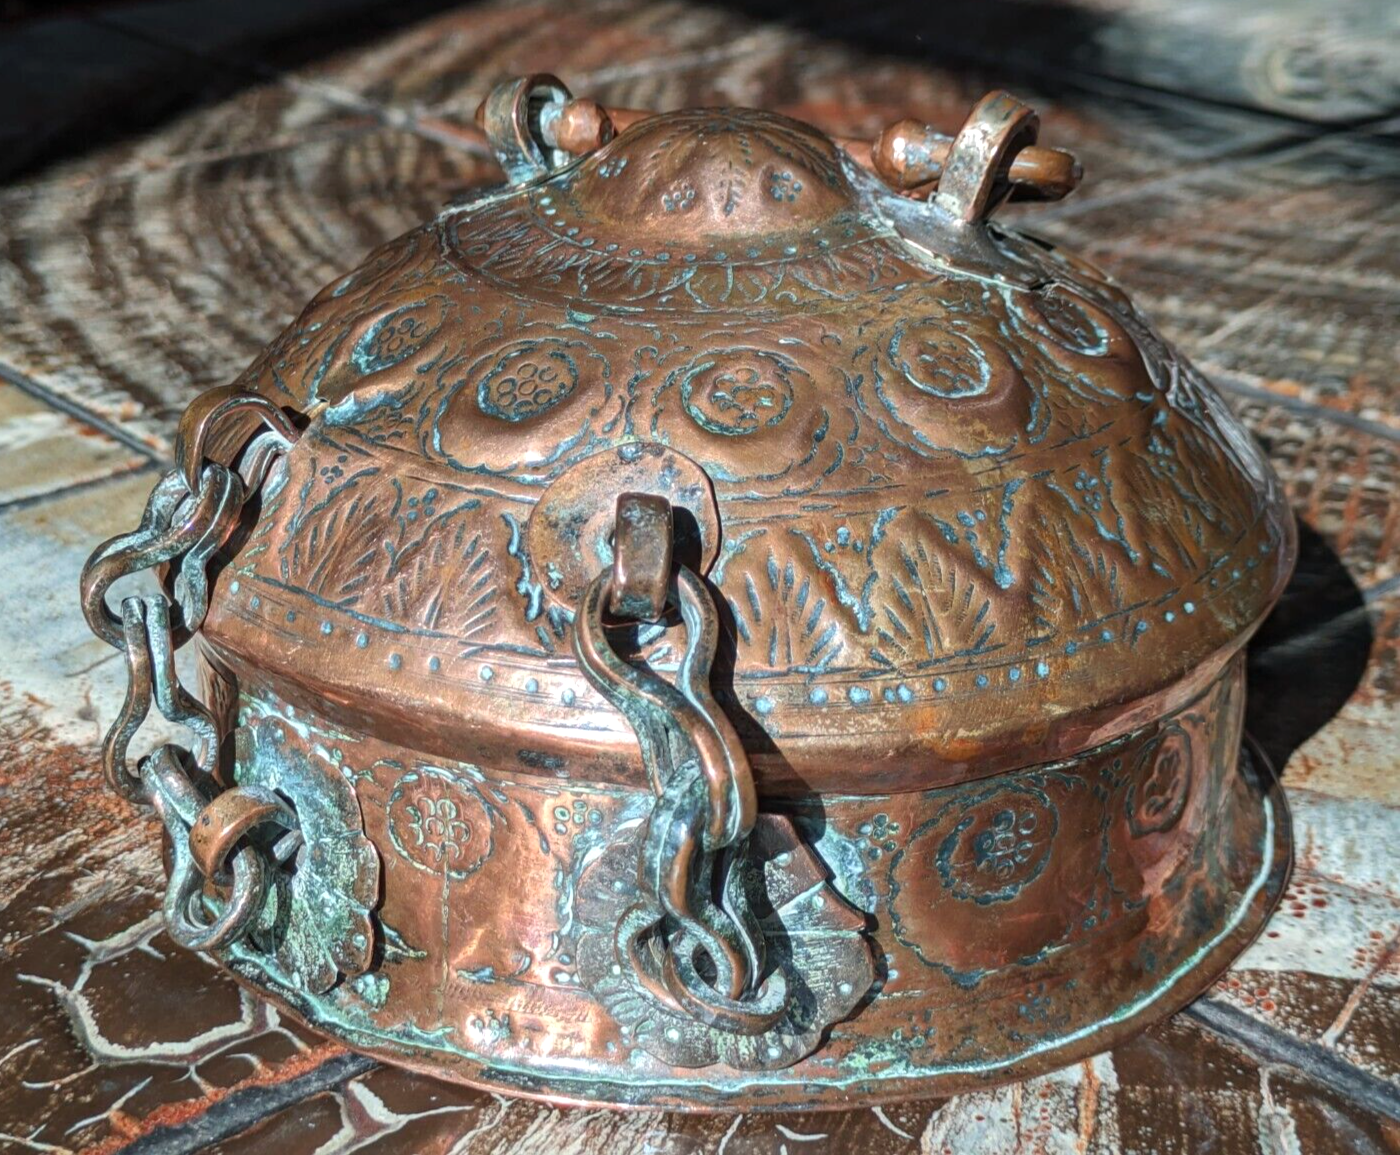 19th Century Indian Mughal Engraved Copper Betel Nut Spice Box Container Antique